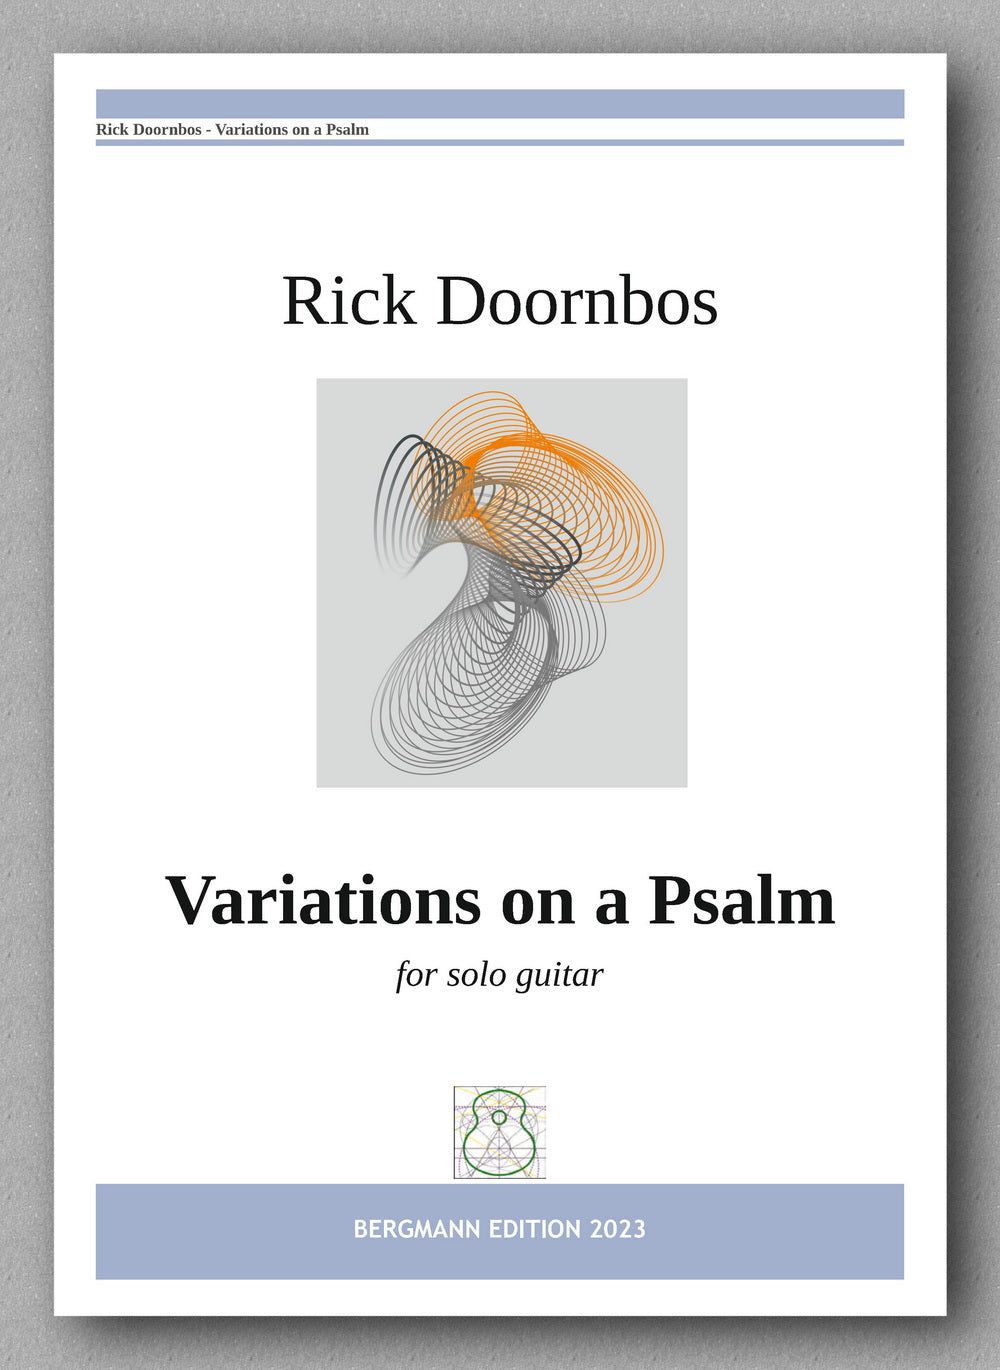 Variations on a Psalm by Rick Doornbos - preview of the cover